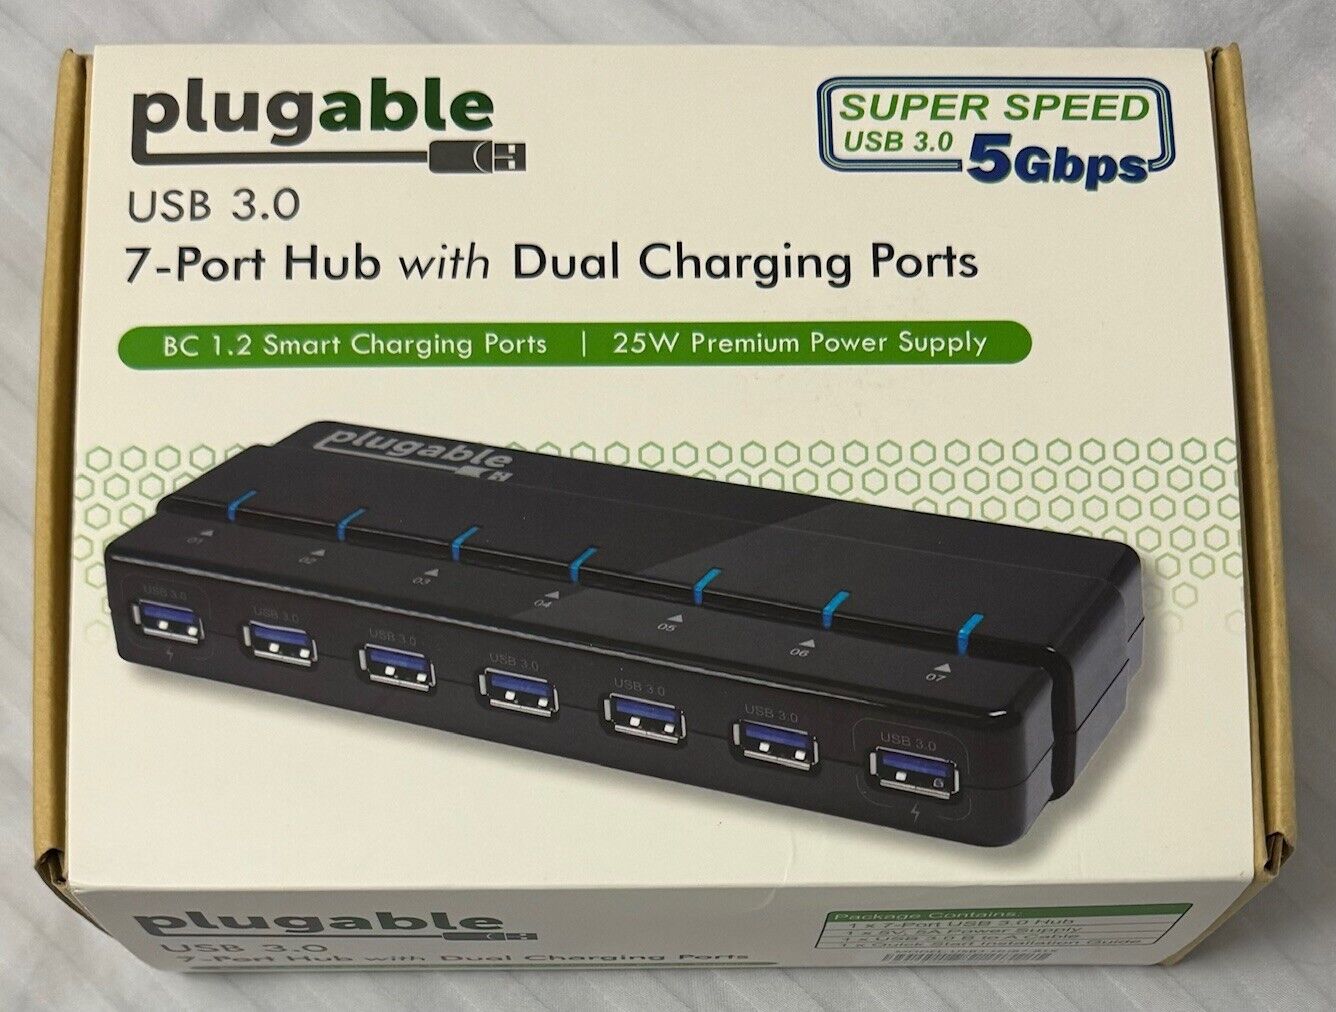 Plugable 7 Port USB 3.0 Hub with Dual Charging Ports SUPER SPEED 5 Gbps